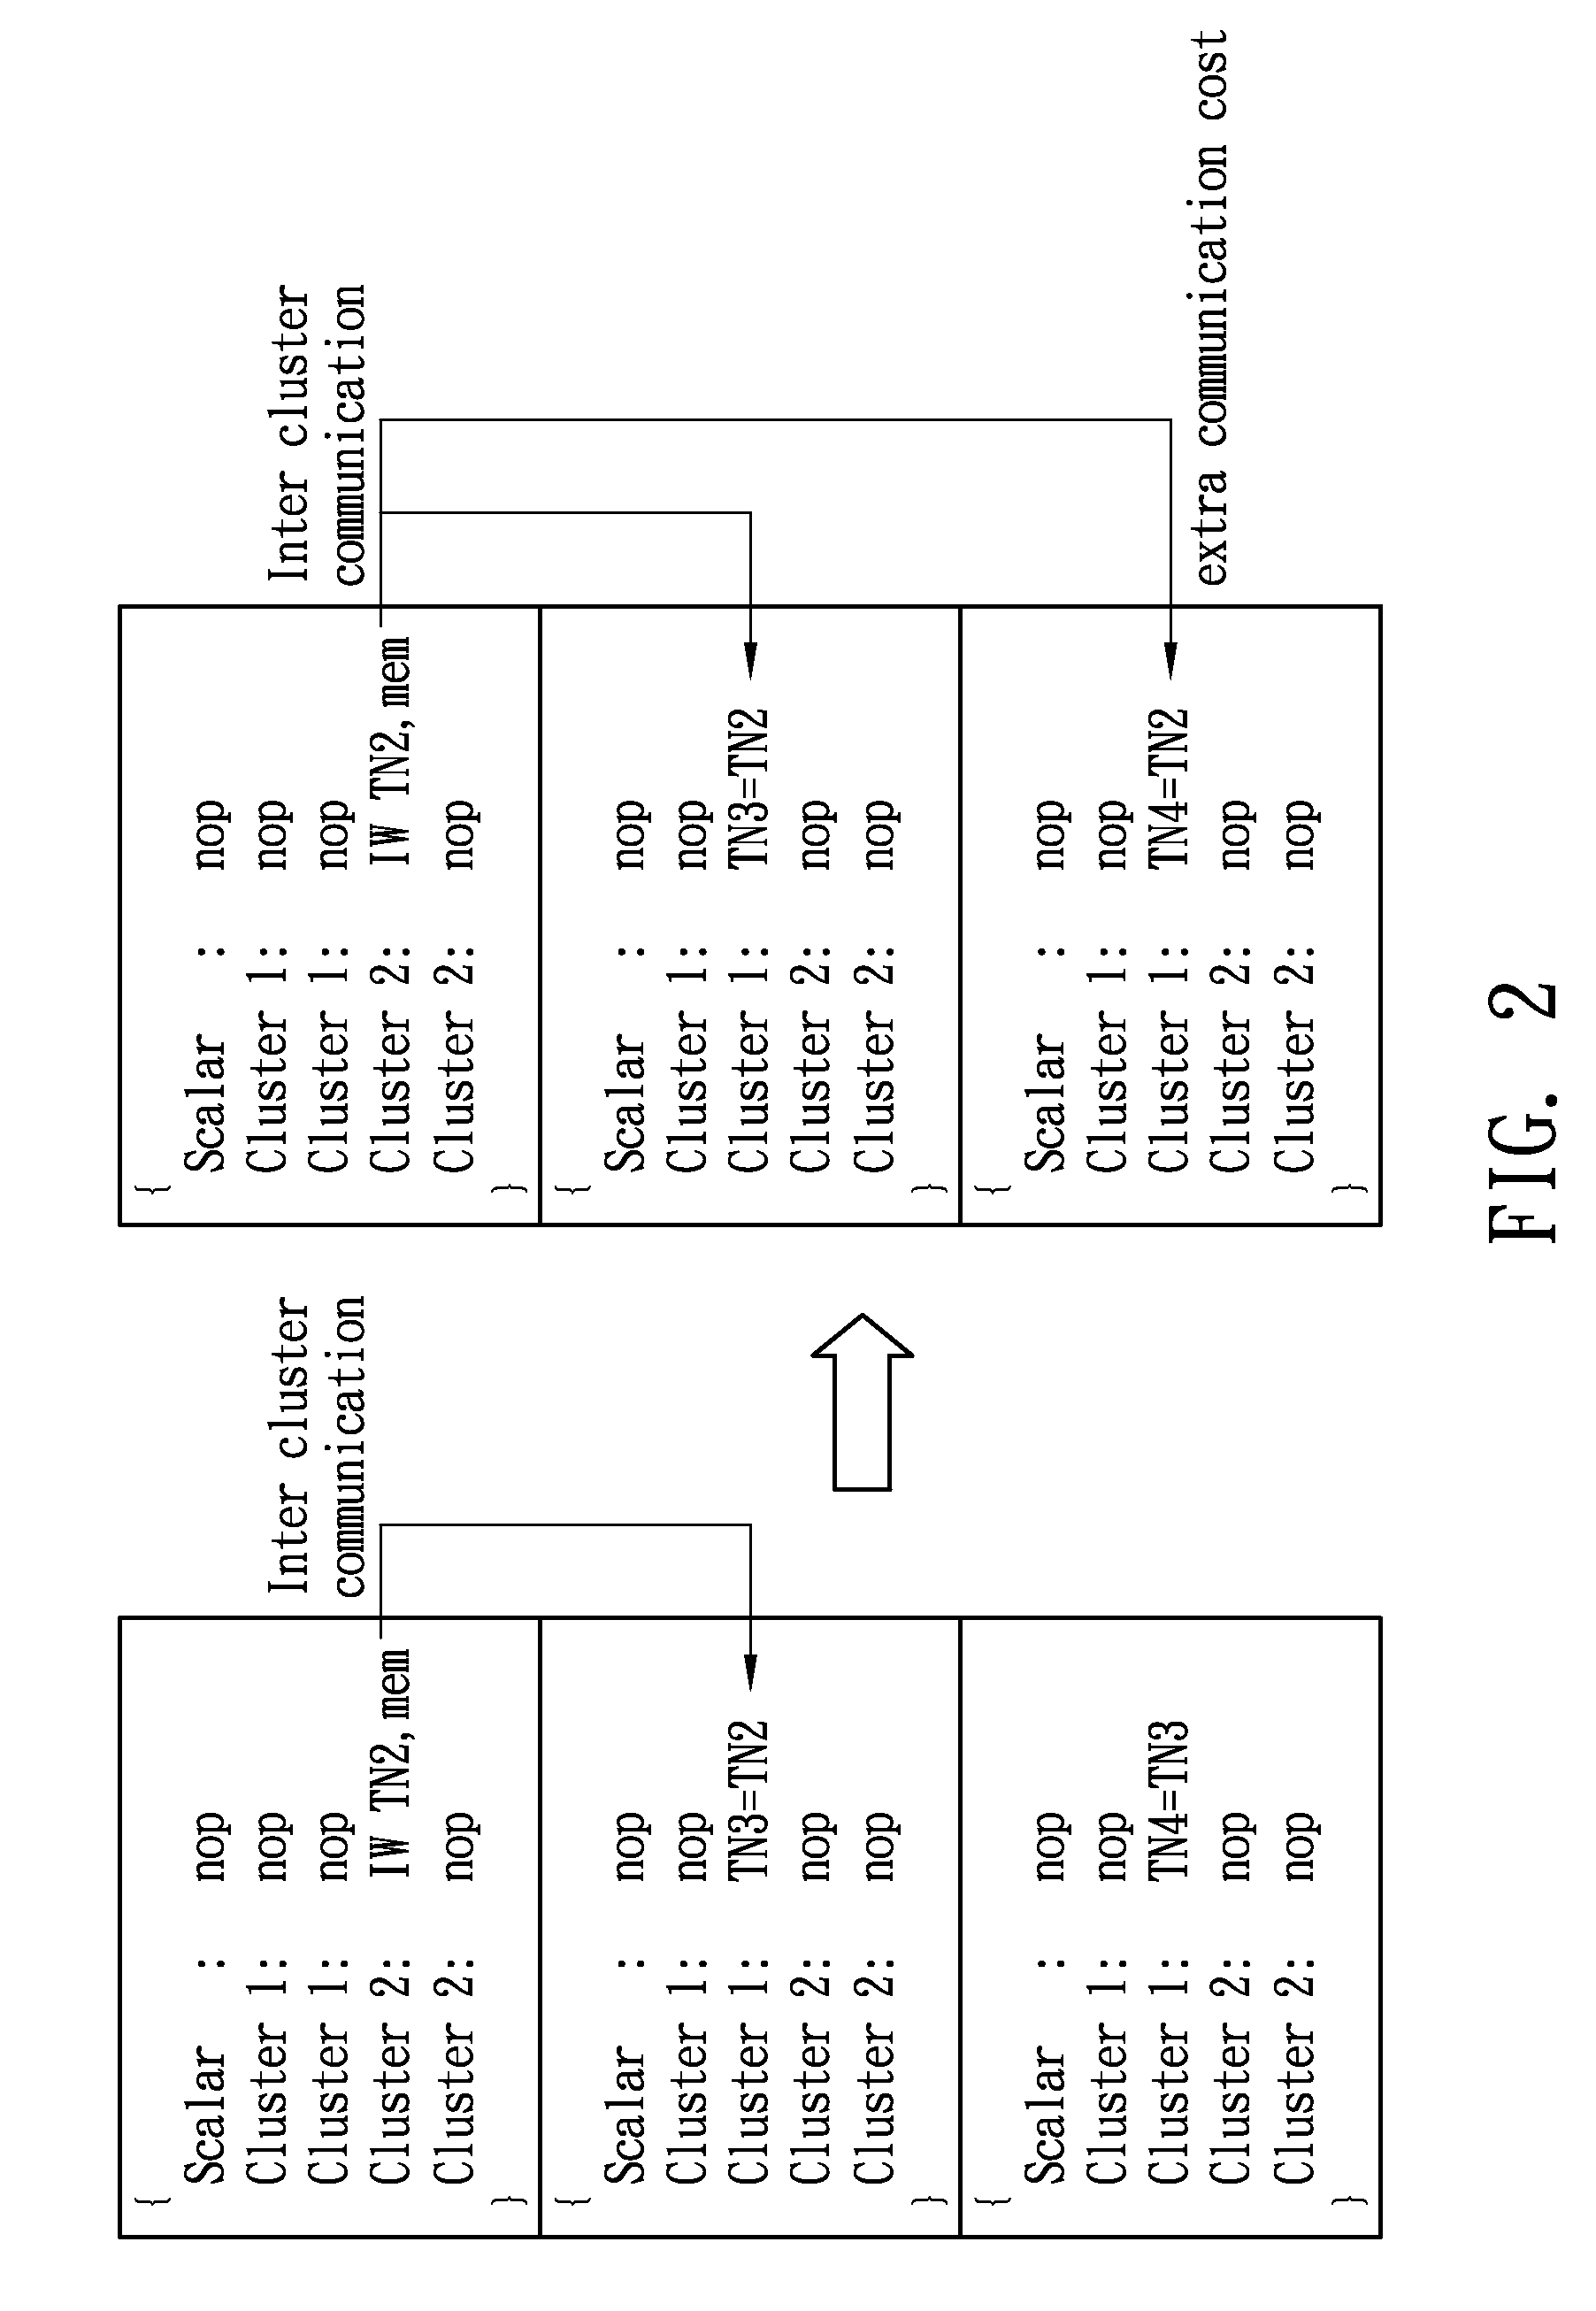 Method for copy propagations for a processor with distributed register file design